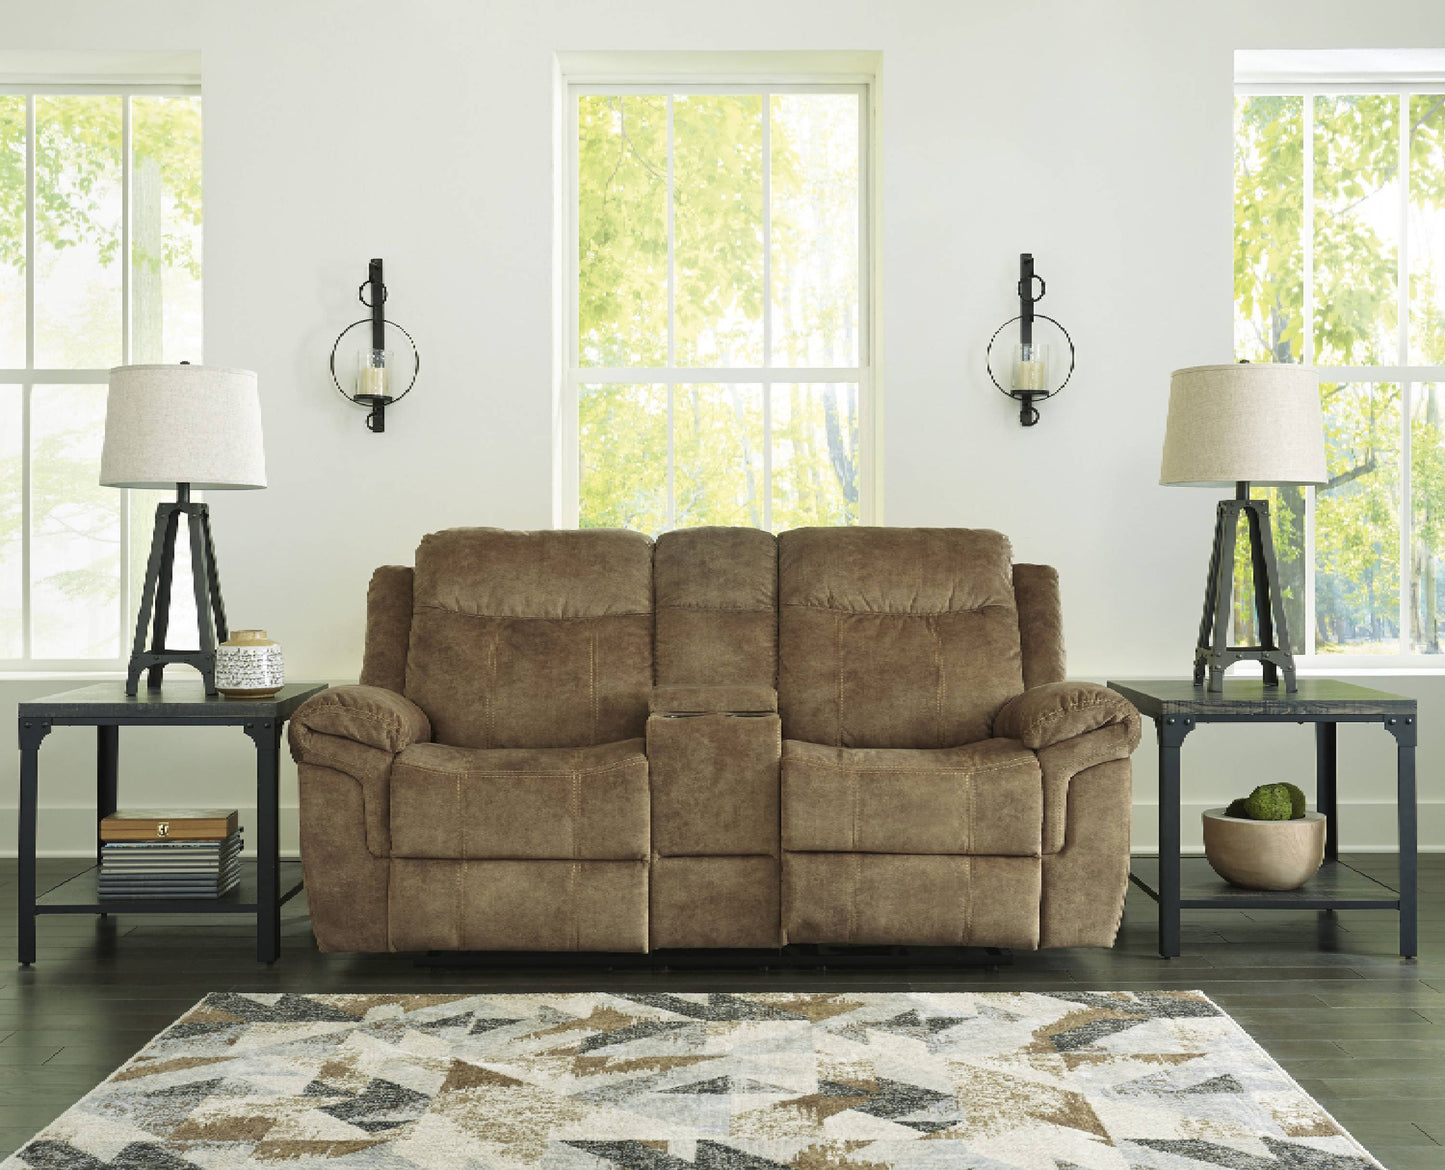 Huddle-Up Nutmeg Glider Reclining Loveseat with Console | 8230494